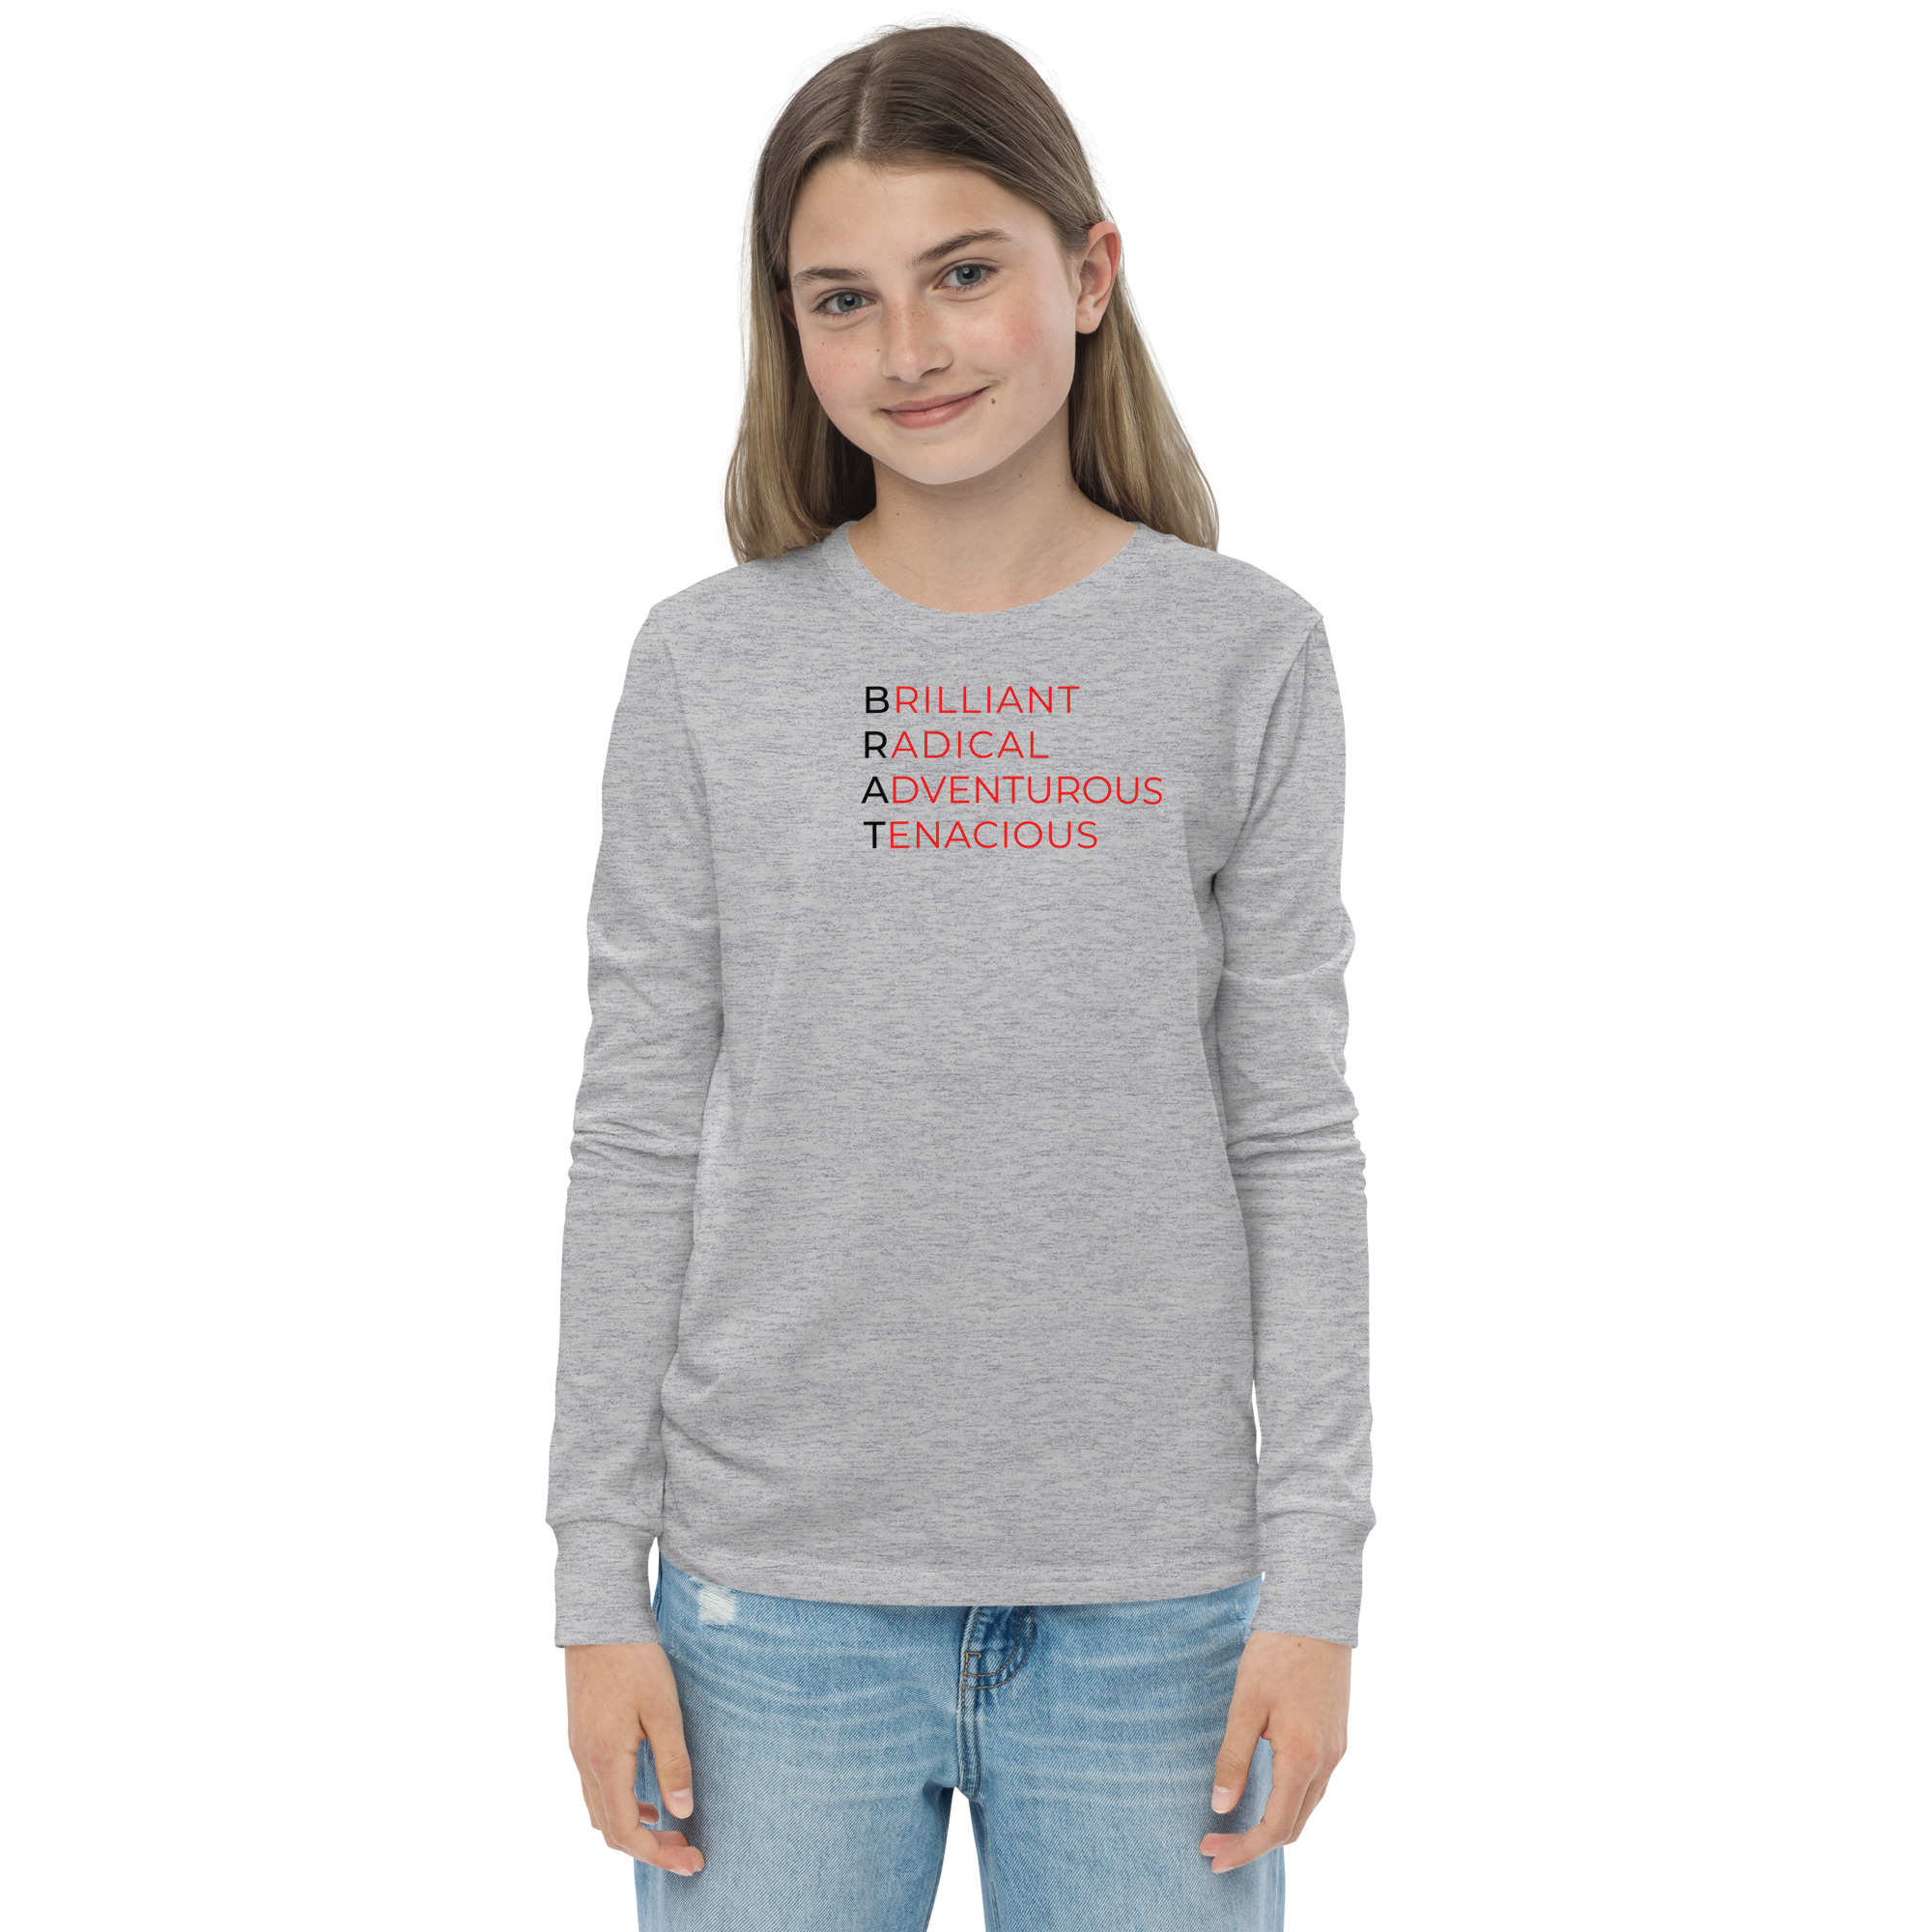 youth-long-sleeve-tee-athletic-heather-front-6384c461577b7.jpg